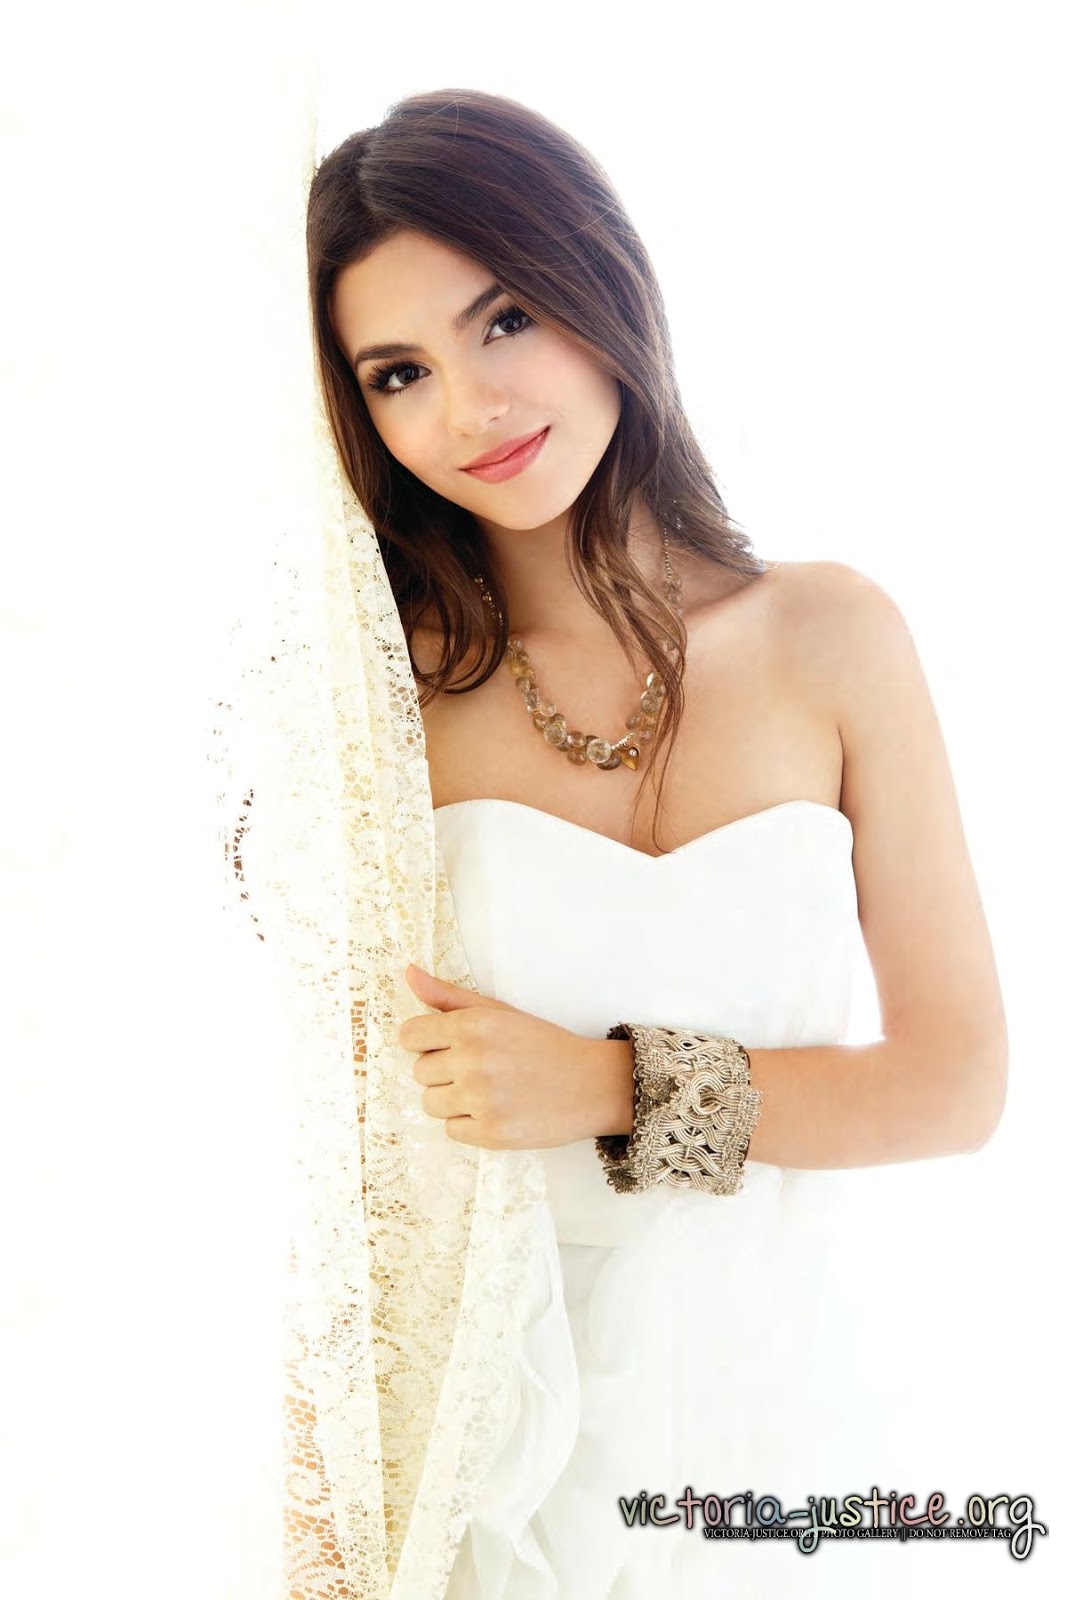 A Look At Drop Dead Gorgeous Actress Victoria Justice Part 2